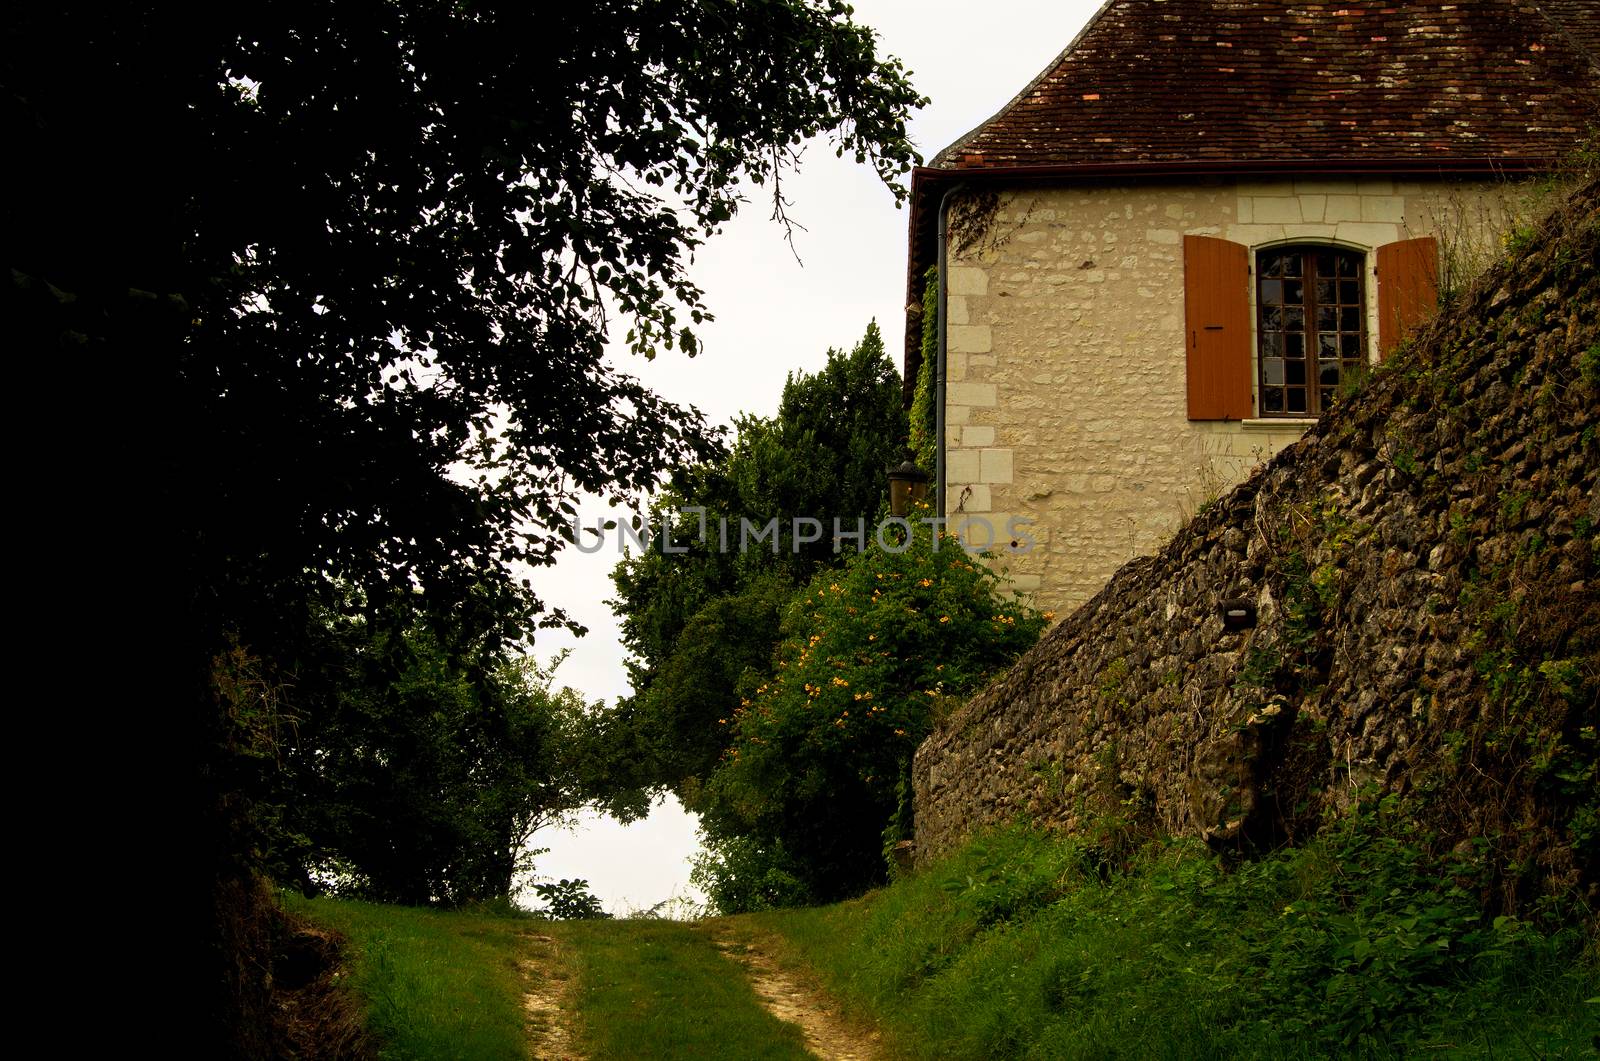 Rural scene in the Indre region of France, with a track running up past the farmhouse shaded by tree cover